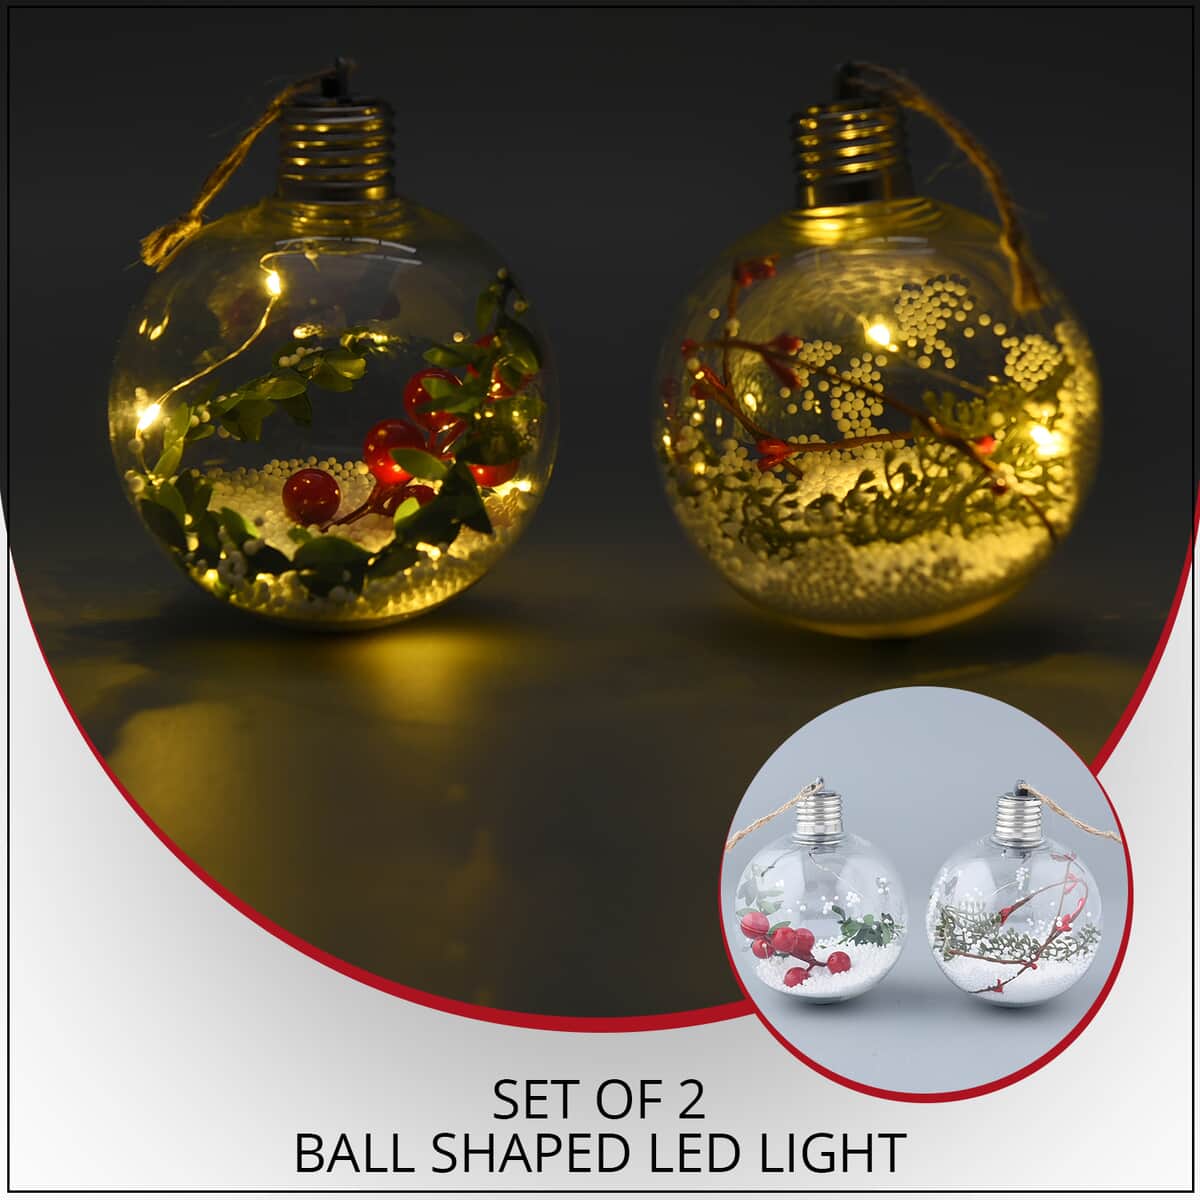 Set of 2 Ball-shaped LED Light (3.93x4.72) (3LR44 Battery Not Included) image number 1